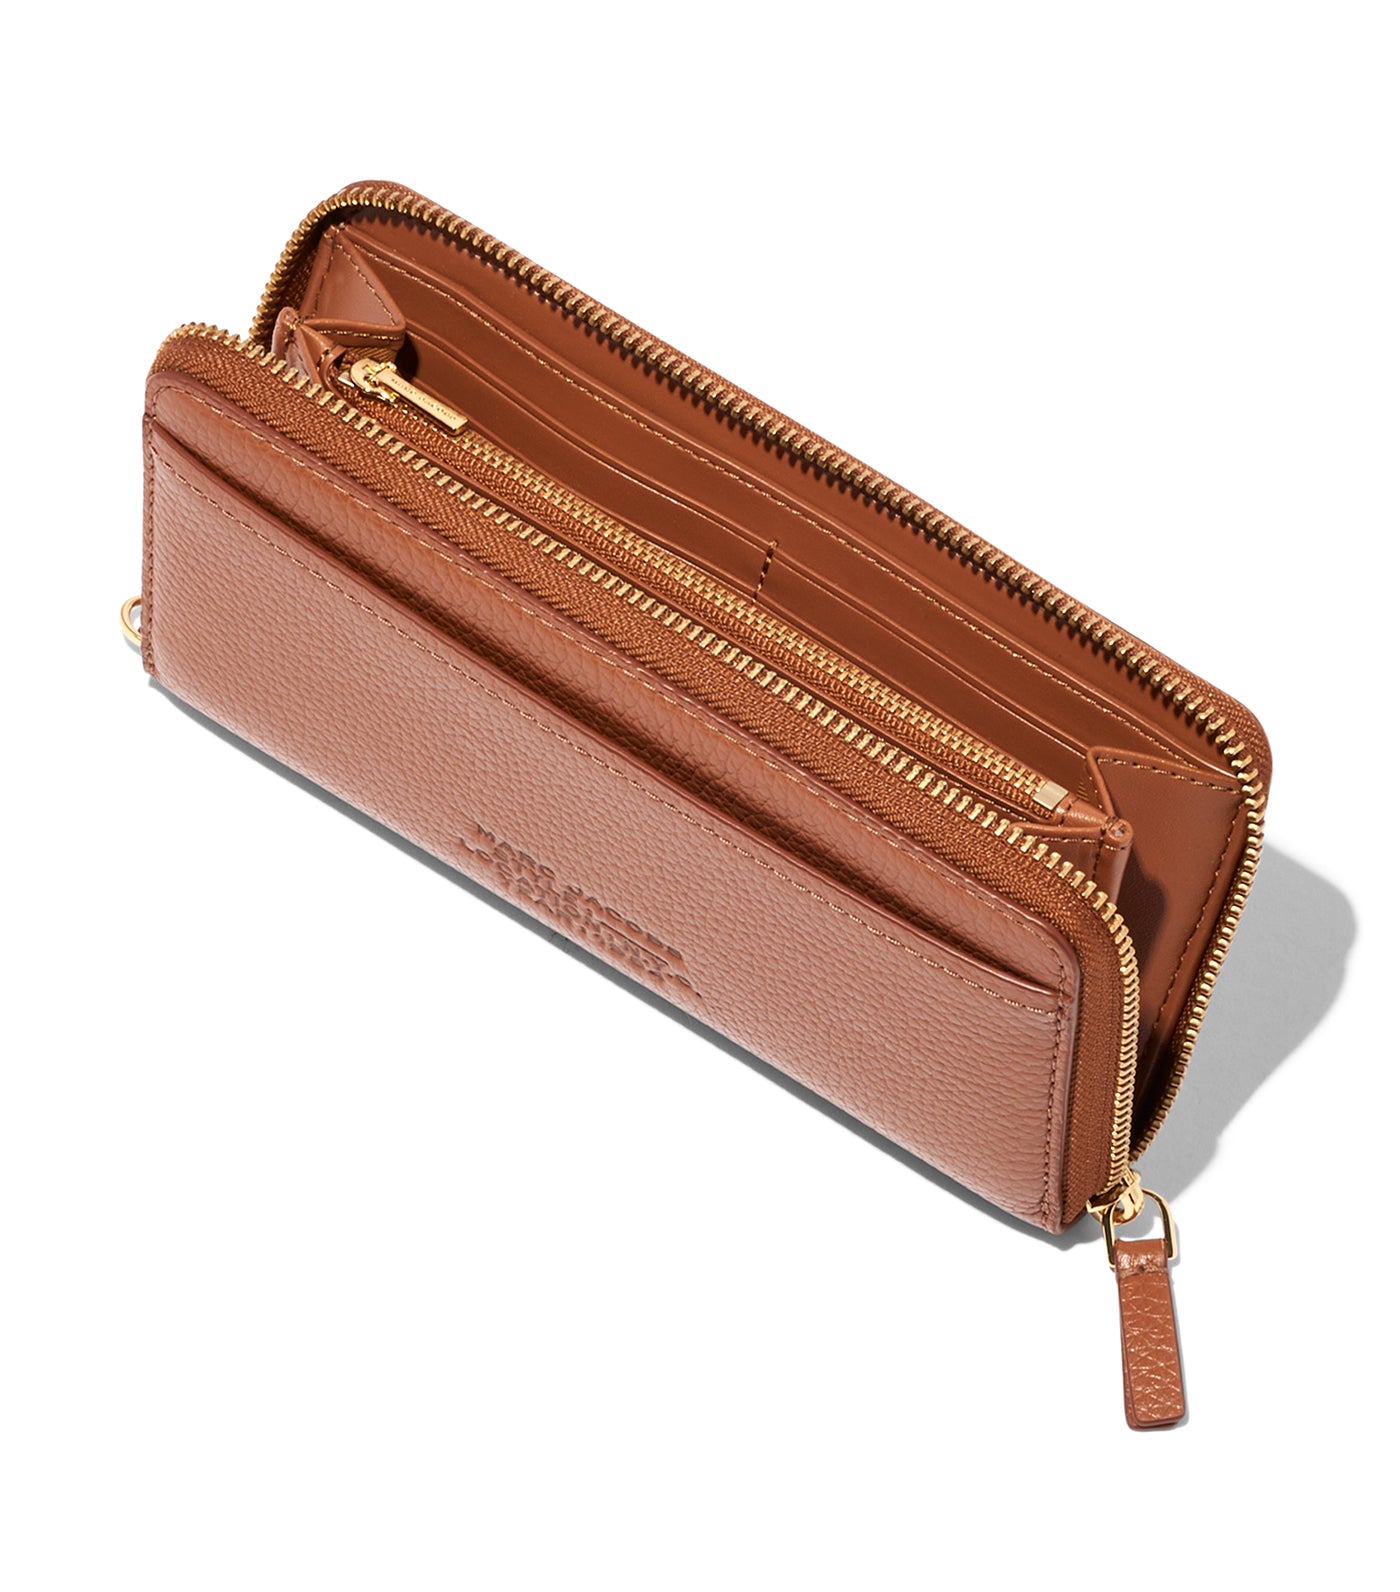 The Leather Continental Wristlet Argan Oil